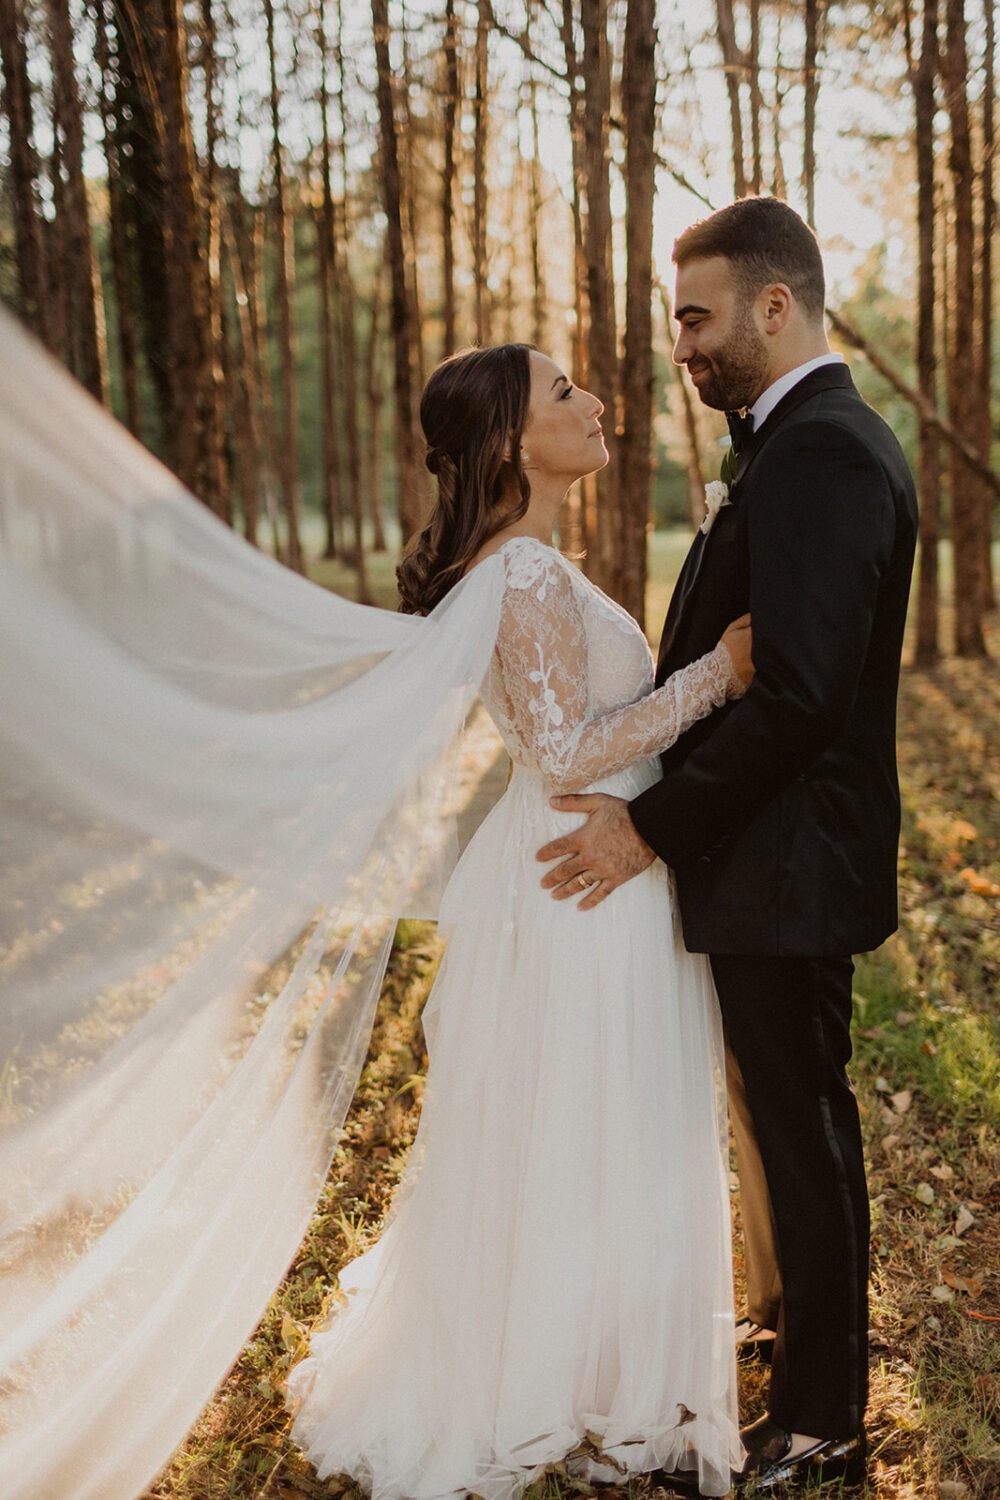 couple embraces in sunset woods at traditional Jewish wedding